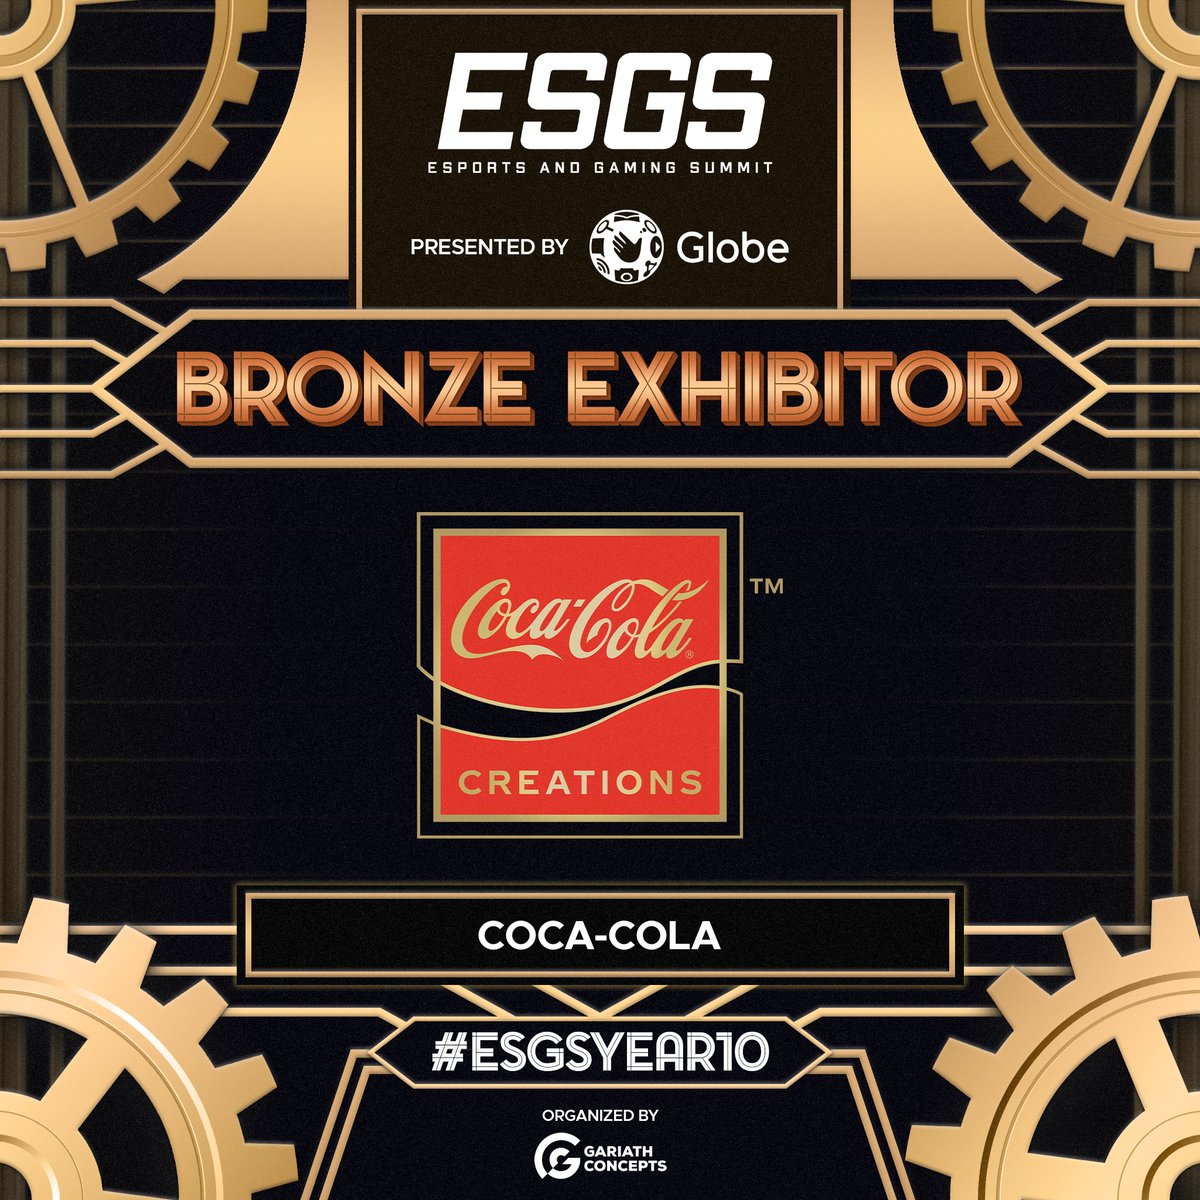 Celebrate the power of gaming and life's epic journeys with this year's newcomer and one of our Bronze Exhibitors, Coca-Cola

Get your fill this Nov 3-5, in World Trade Center, Pasay City.

Iron tickets are still available for purchase ONSITE!

#CocaColaUltimate
#TasteTheXP